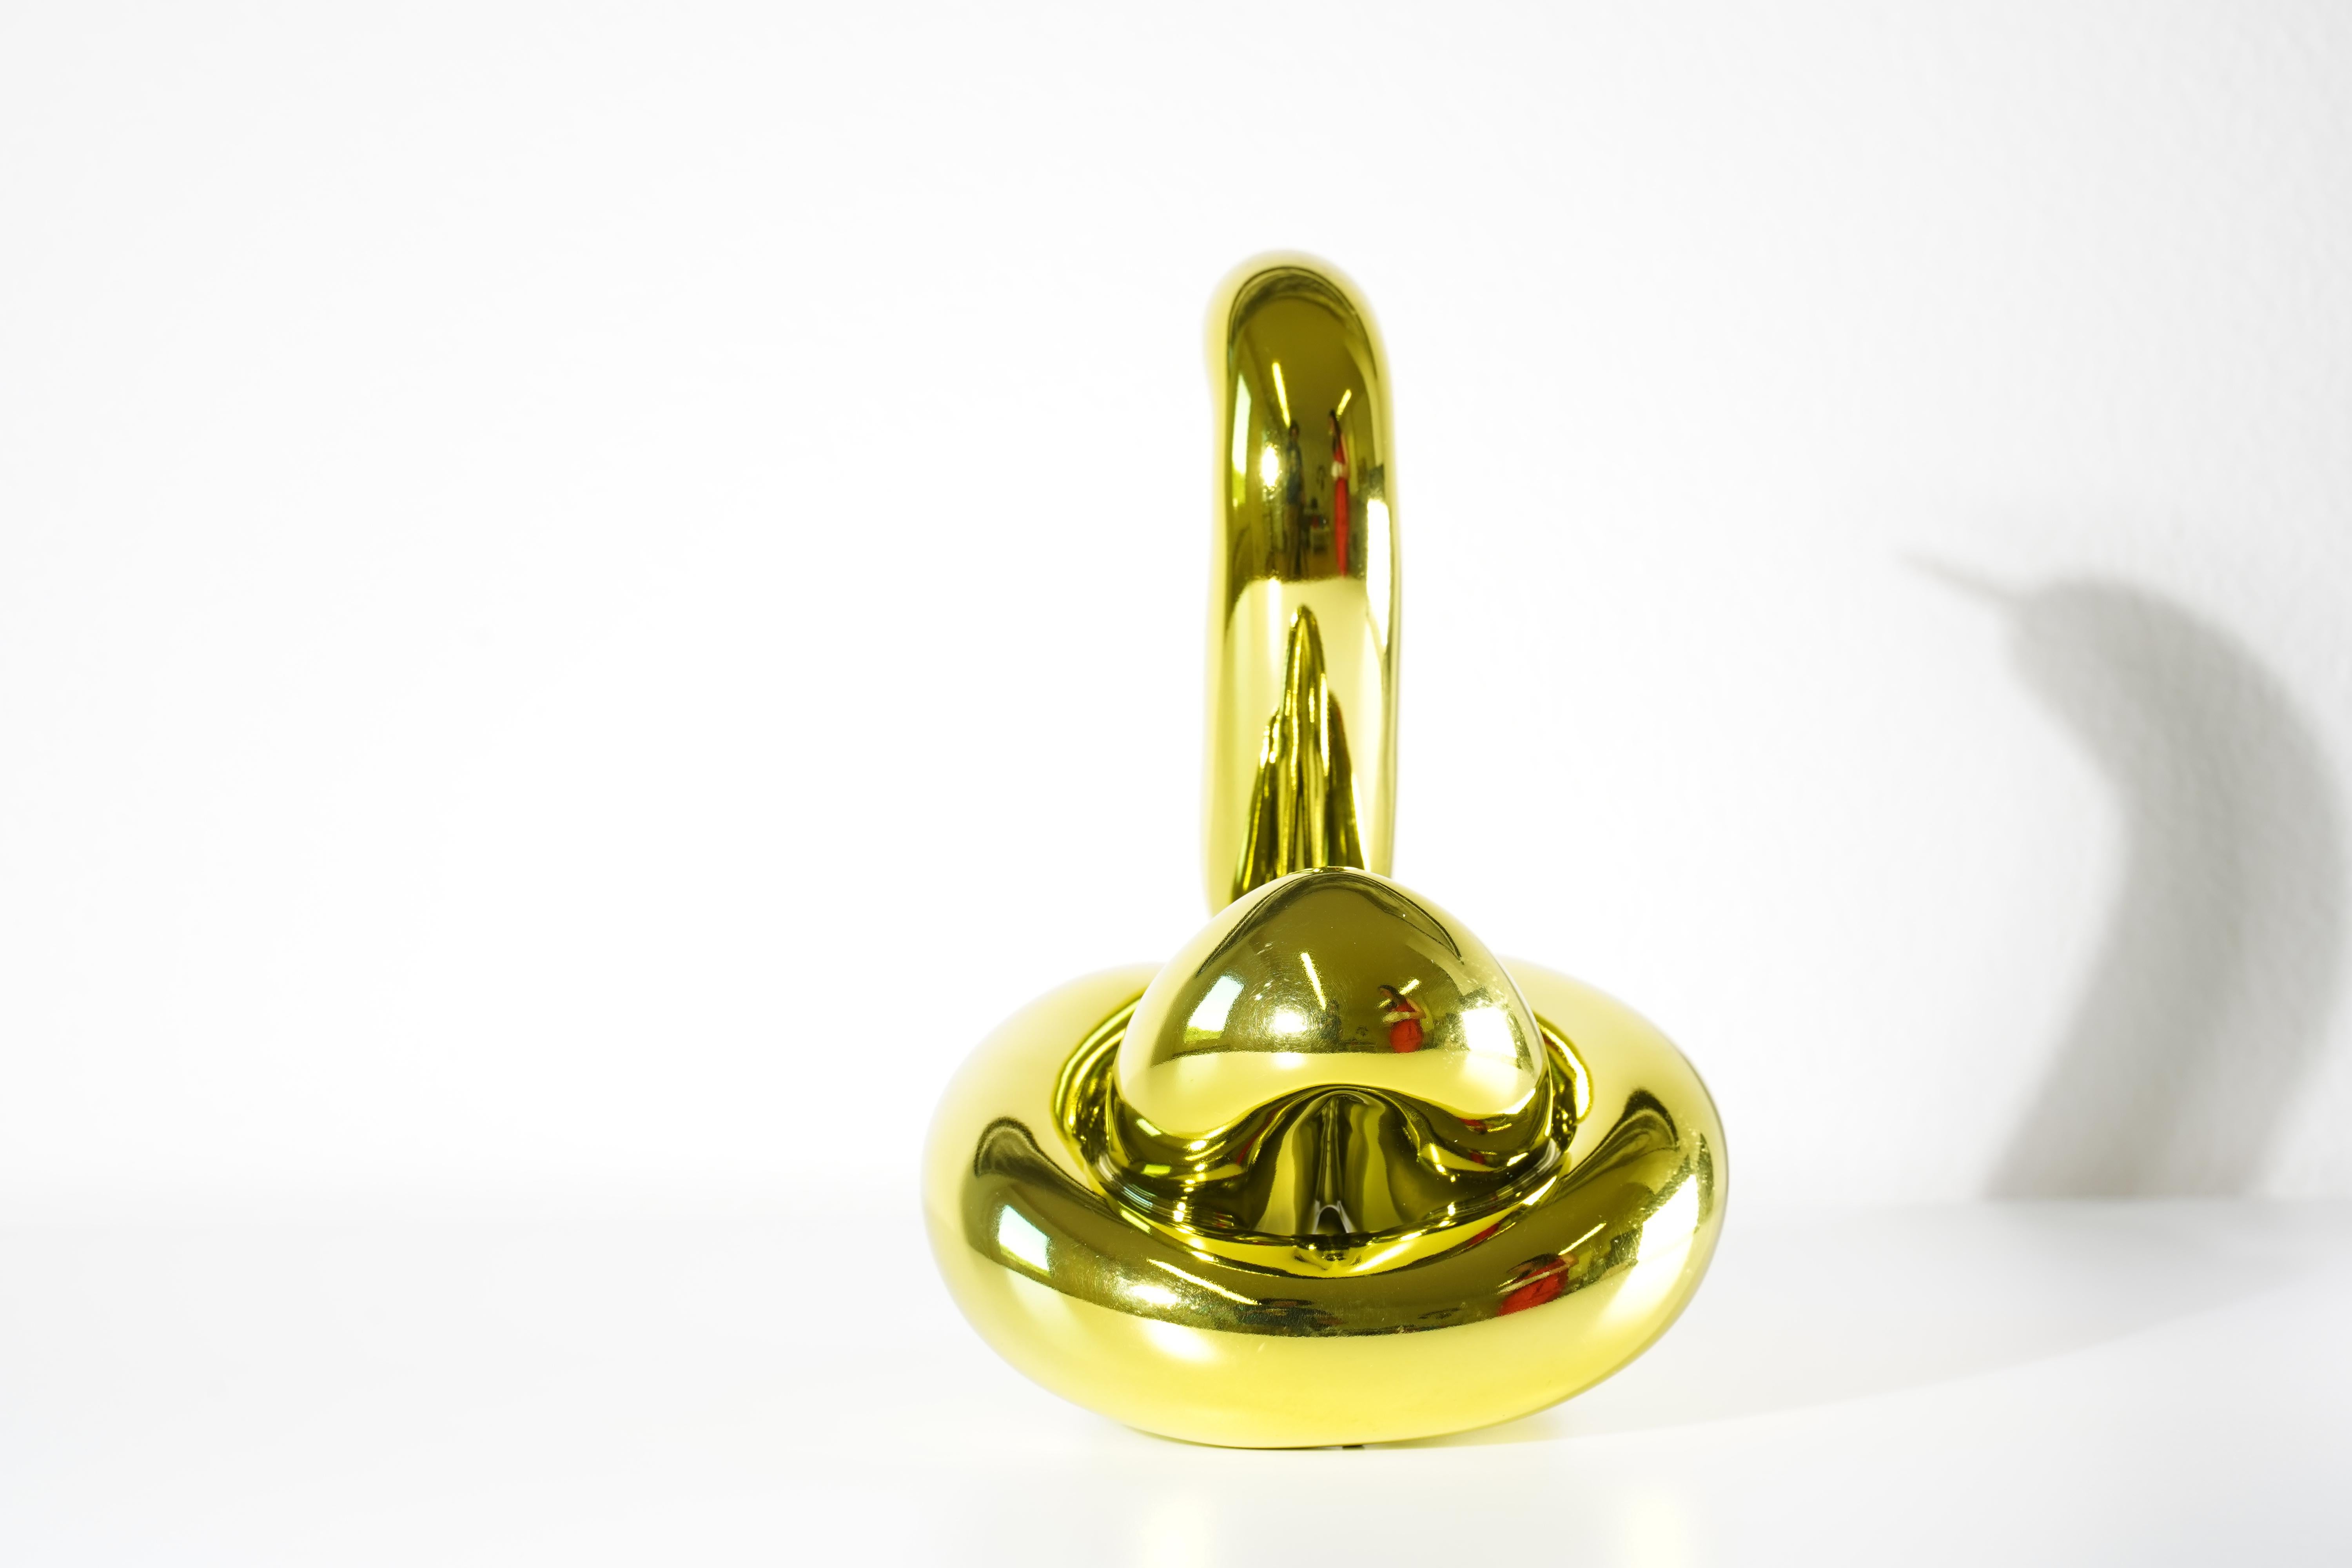 Balloon Swan (Yellow) - Jeff Koons, 21st Century, Contemporary, Porcelain, Sculpture, Decor, Limited Edition

Limoges porcelain with chromatic metalized coating
Edition of 999
Signed and numbered
In mint condition, as acquired from the